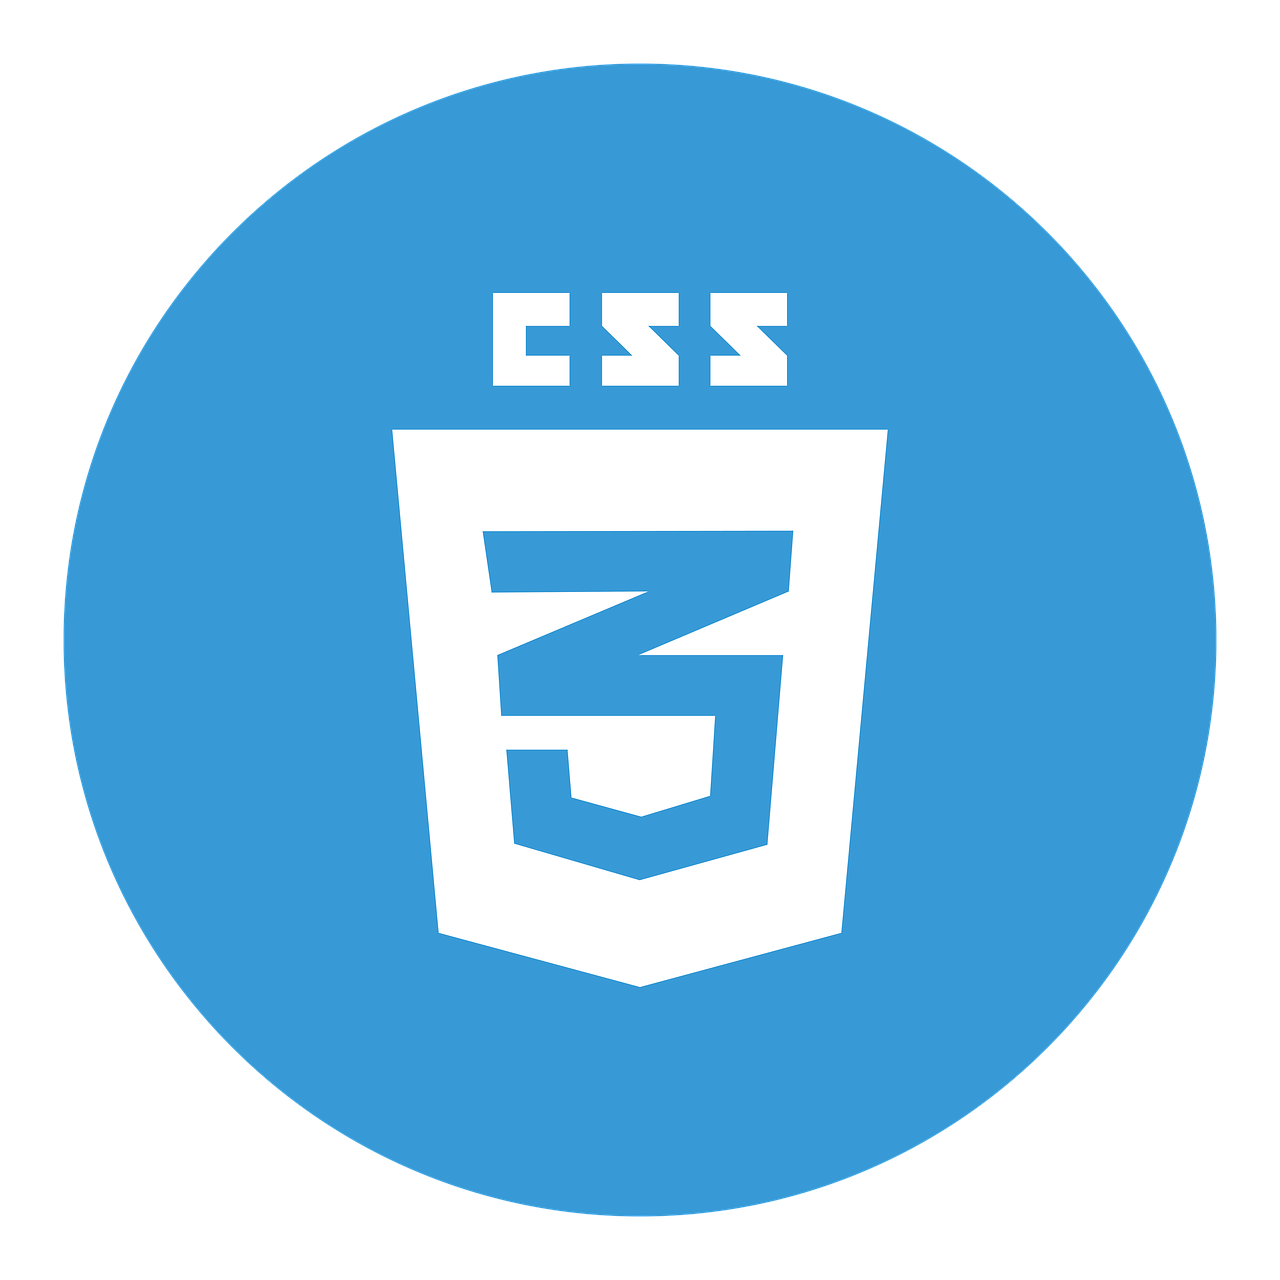 An icon depicting Cascading Style Sheets 3 technology